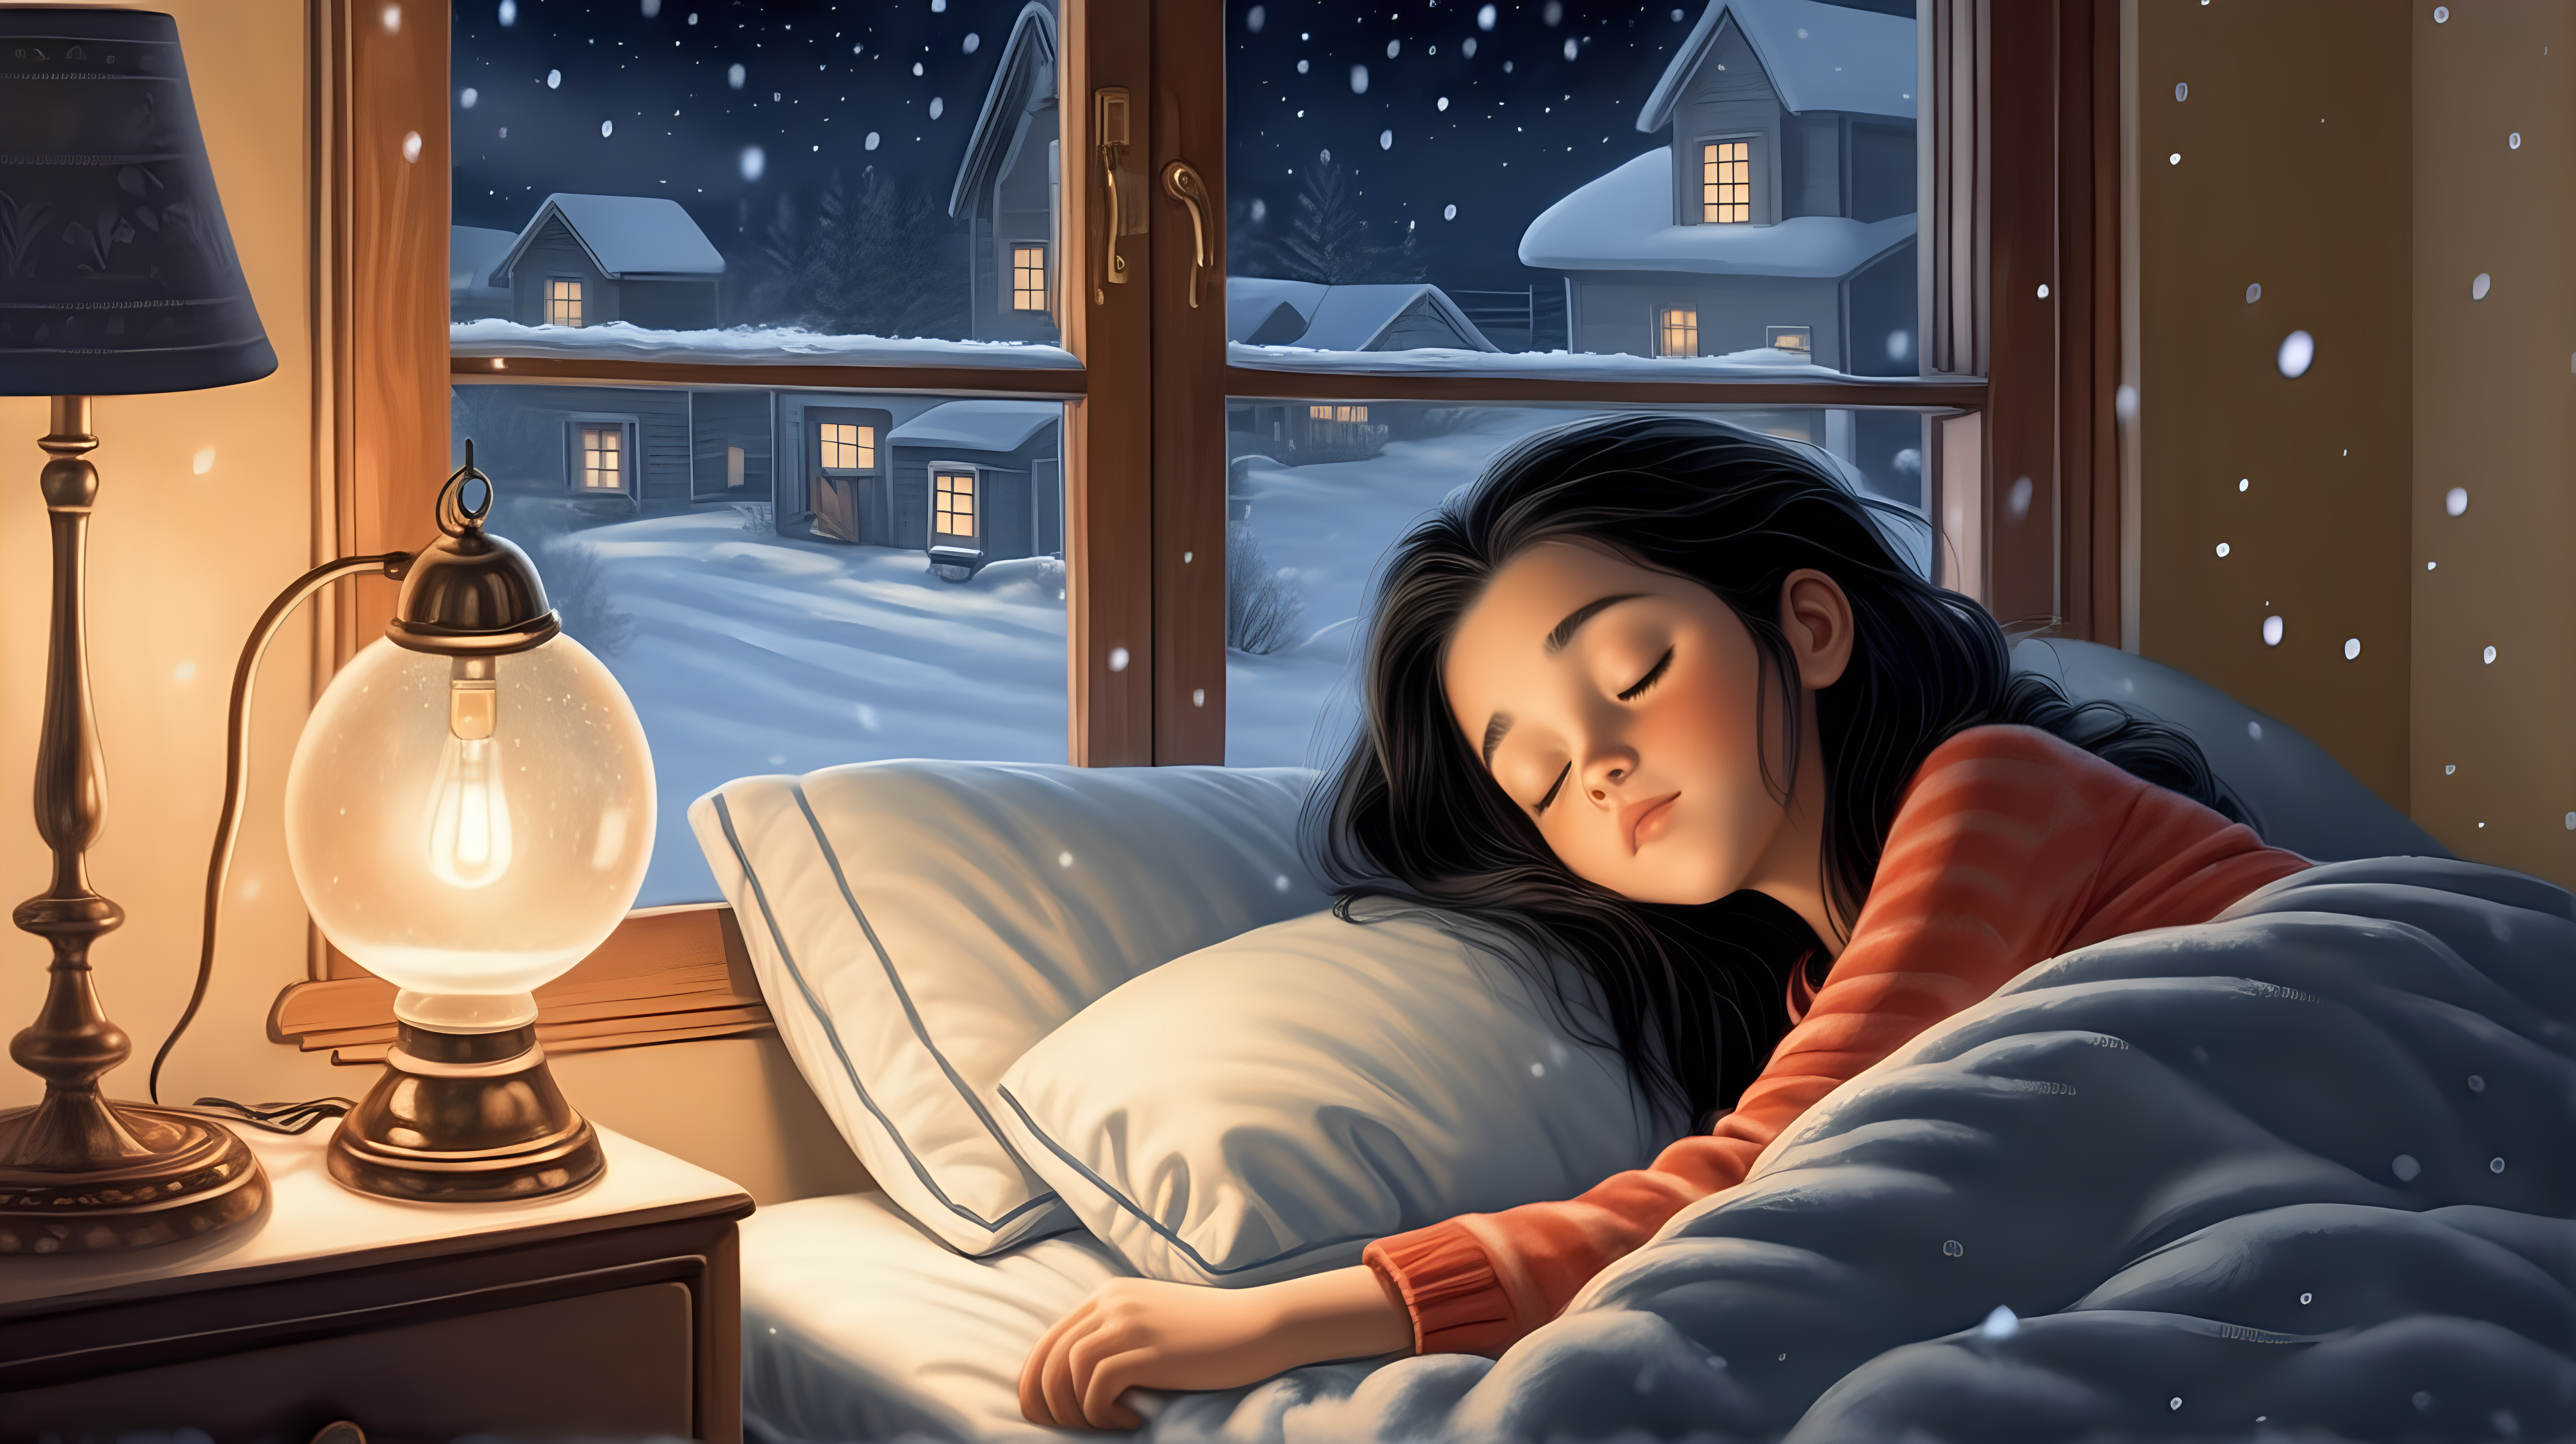 a beautiful girl is sleeping soundly in the bedroom, black hair, it is snowing outside the window, evening lighting from a lamp, deep focus: illustration for a story about a girl,